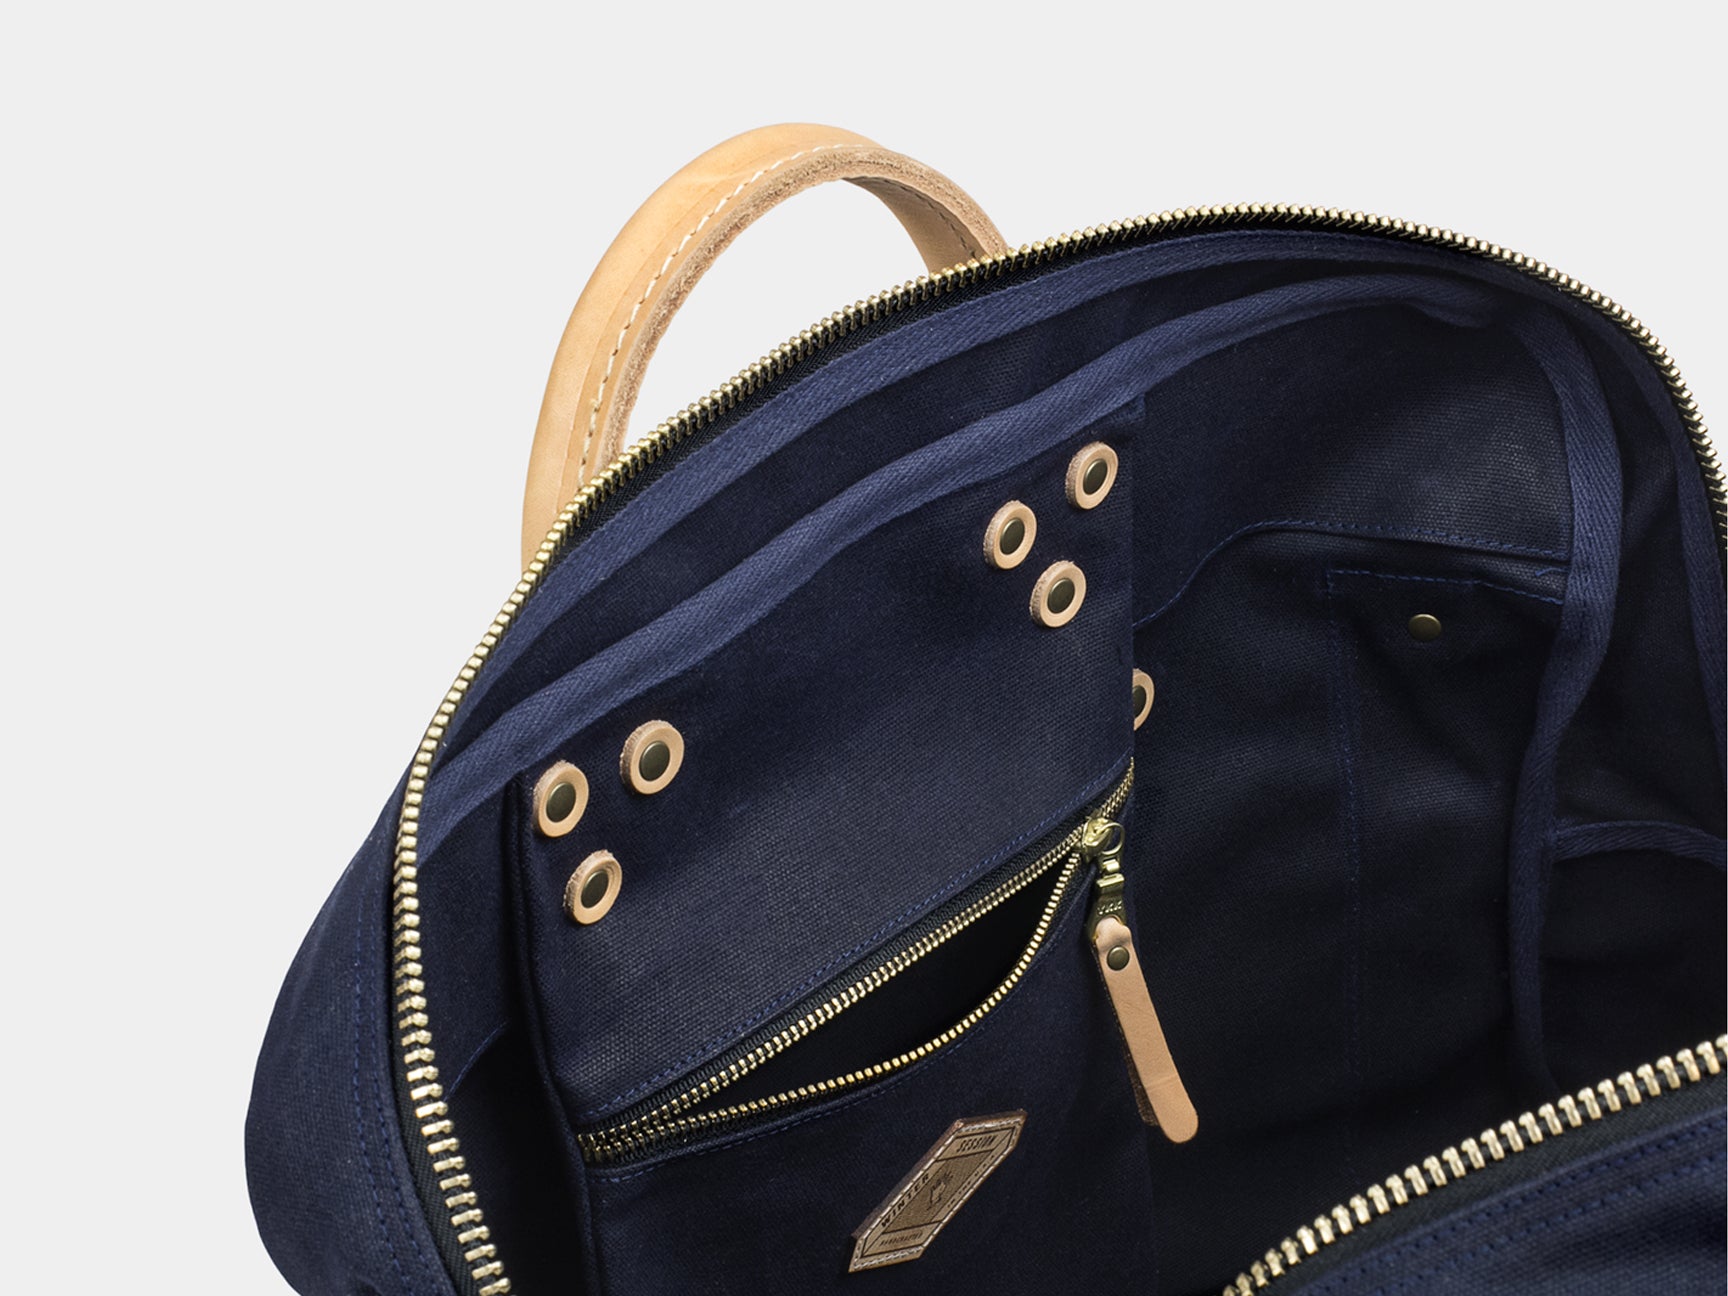 Winter Session Waxed Canvas Weekender Bag